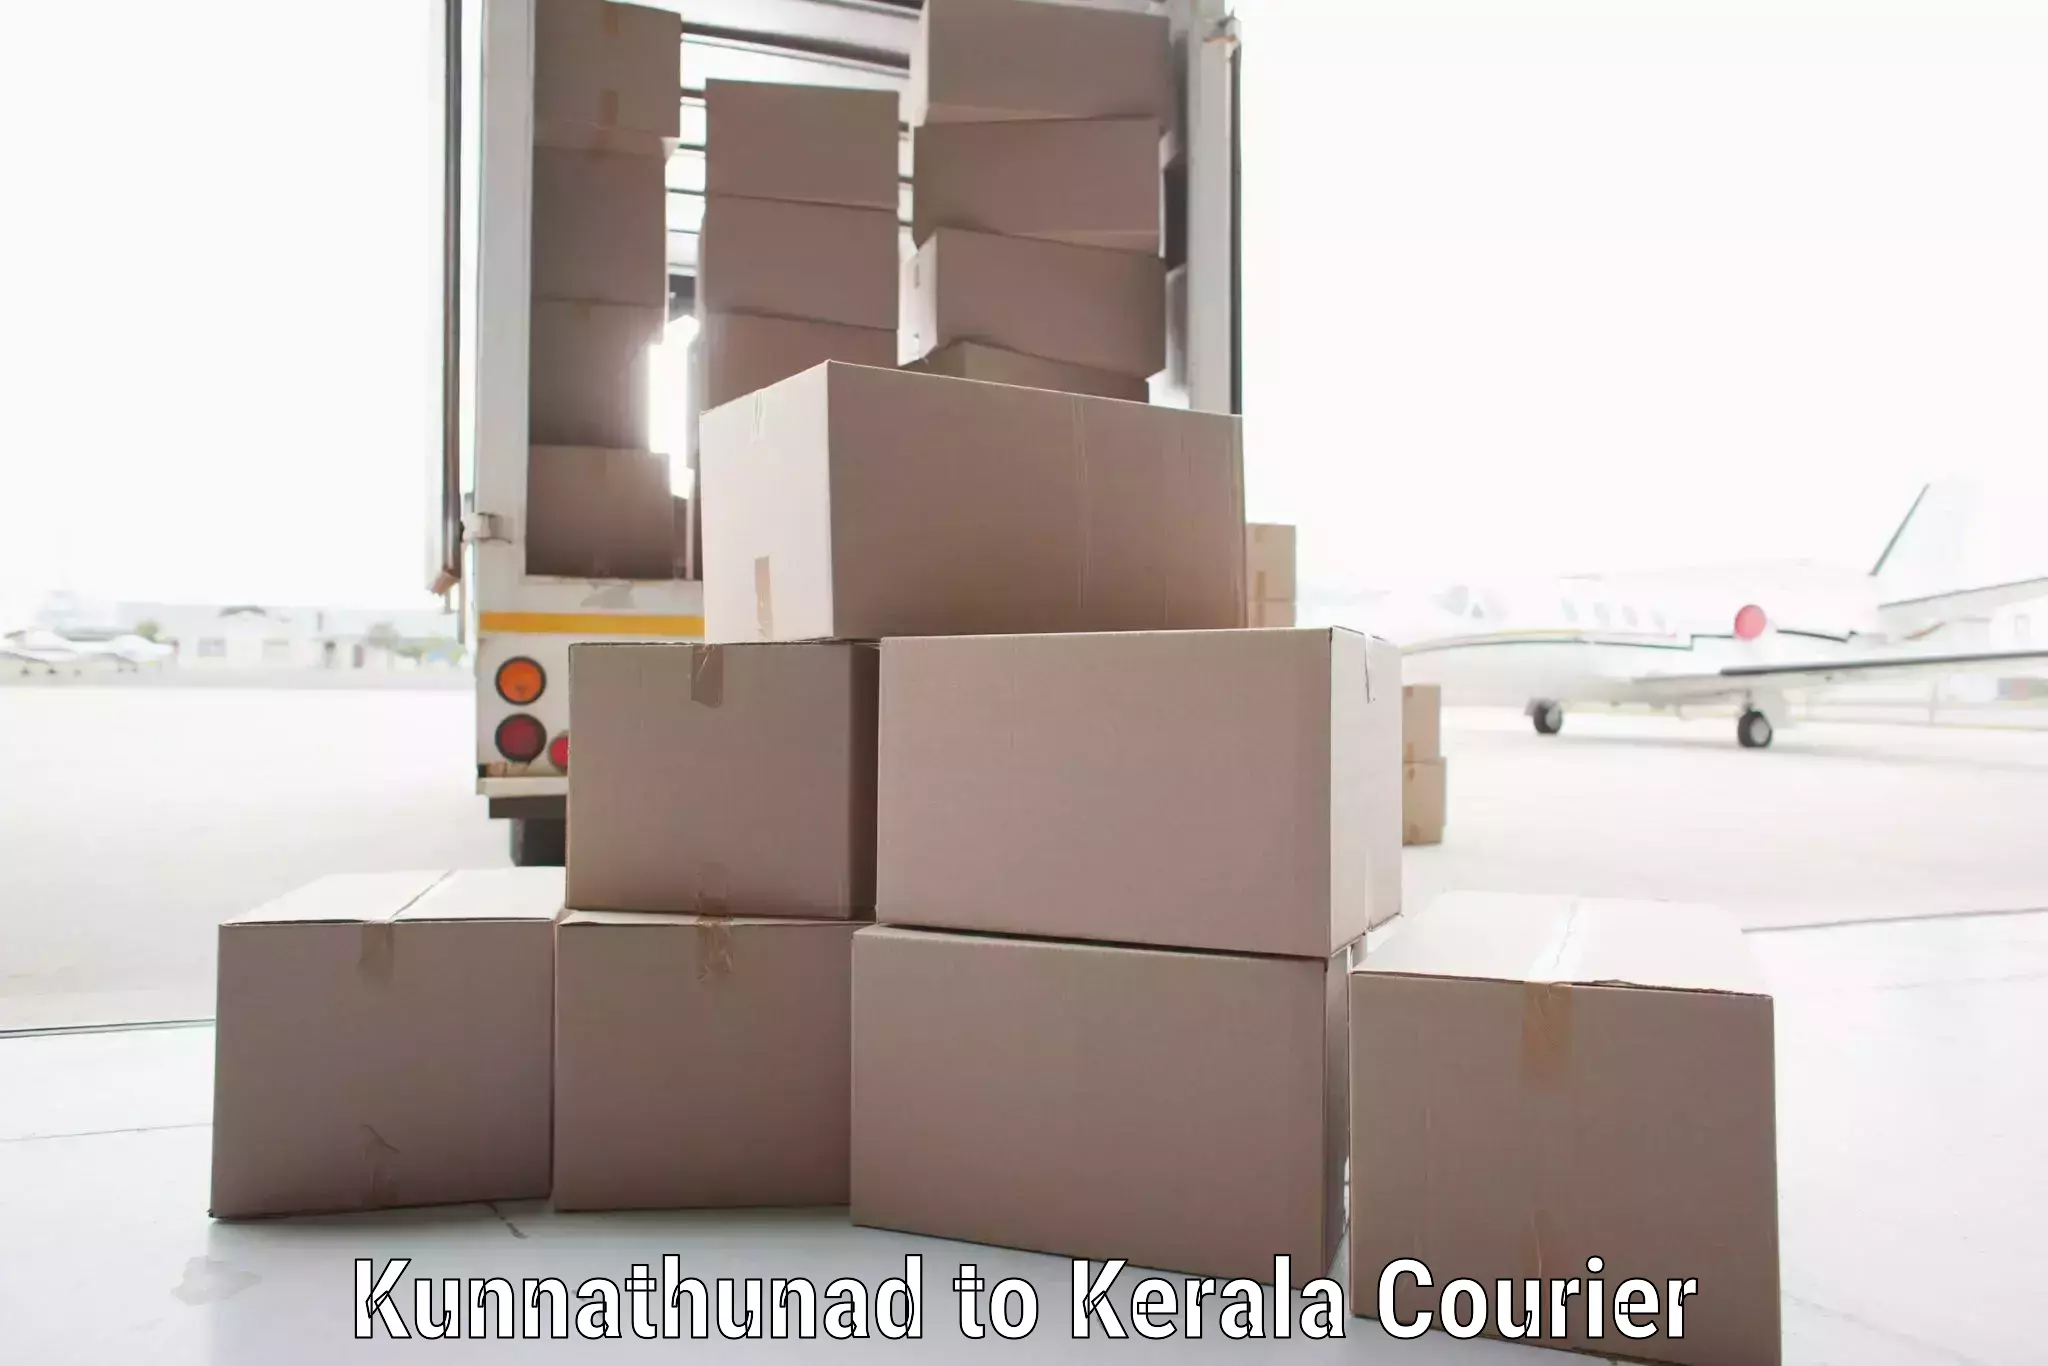 Full-service courier options Kunnathunad to Trivandrum